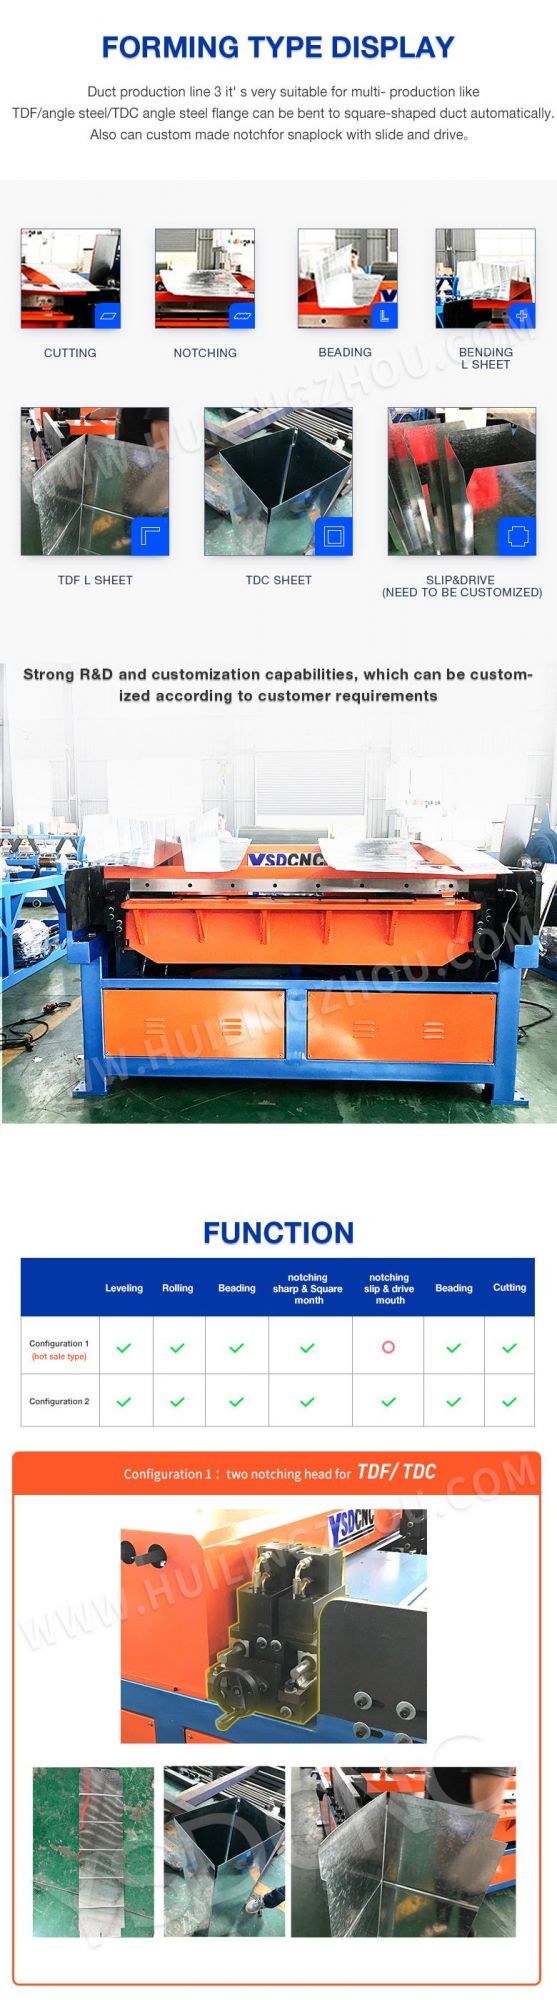 Ysdcnc Brand Economical Auto Duct Line 3 Air Conditioning Tube Making Line with Simple Operation